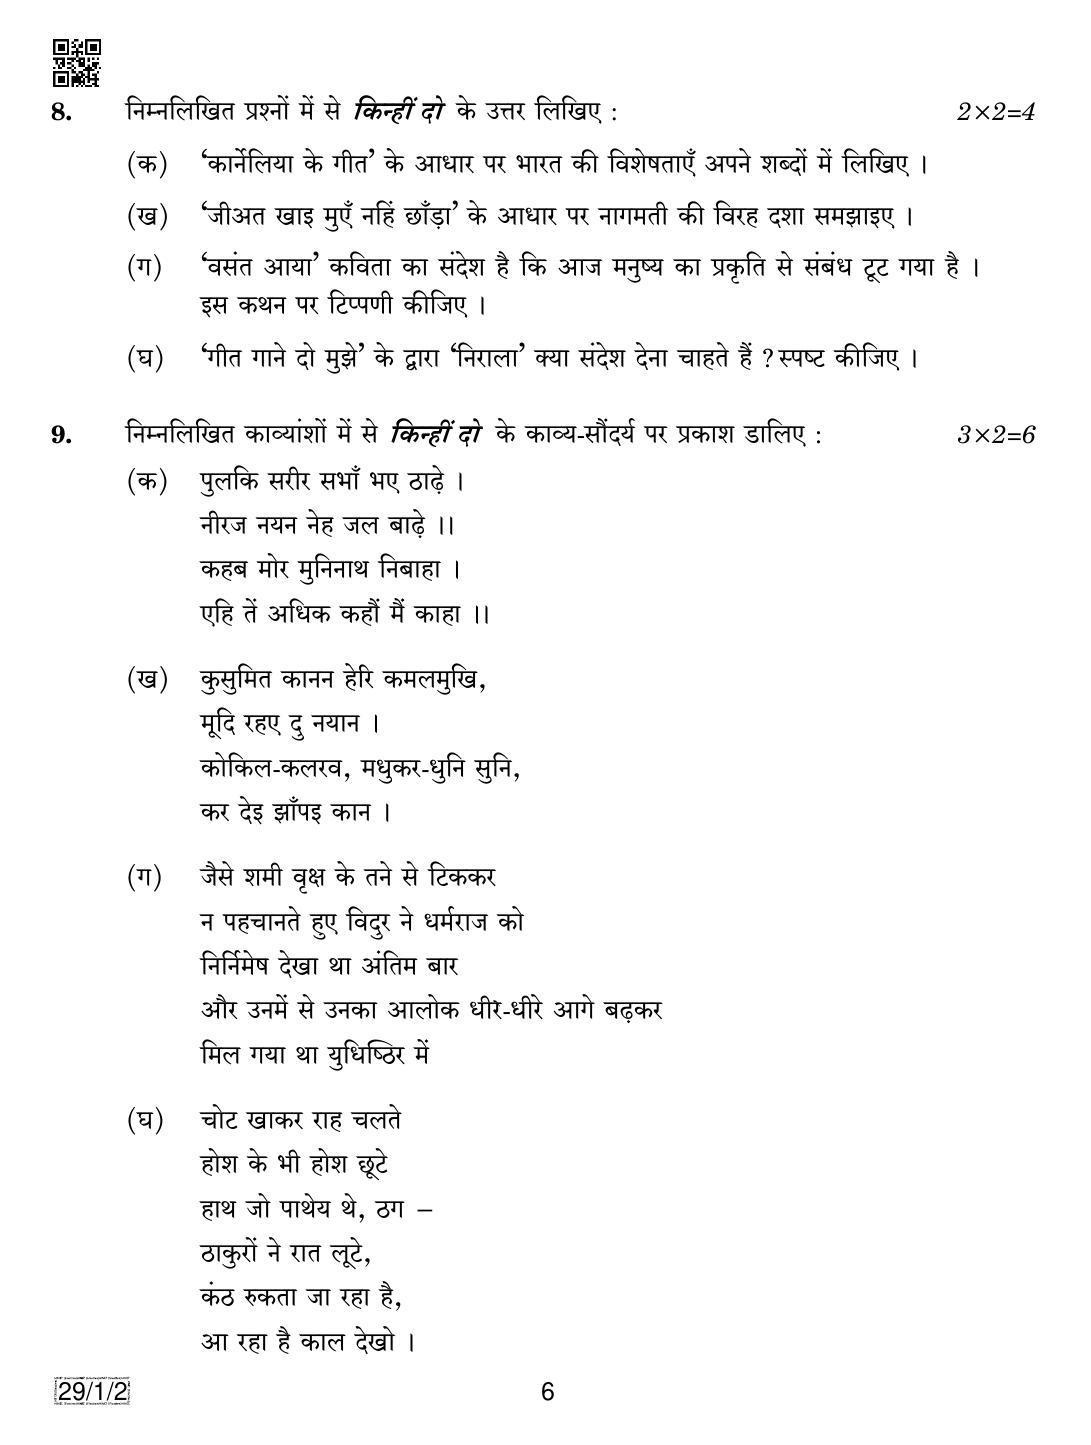 CBSE Class 12 29-1-2 HINDI ELECTIVE 2019 Compartment Question Paper - Page 6